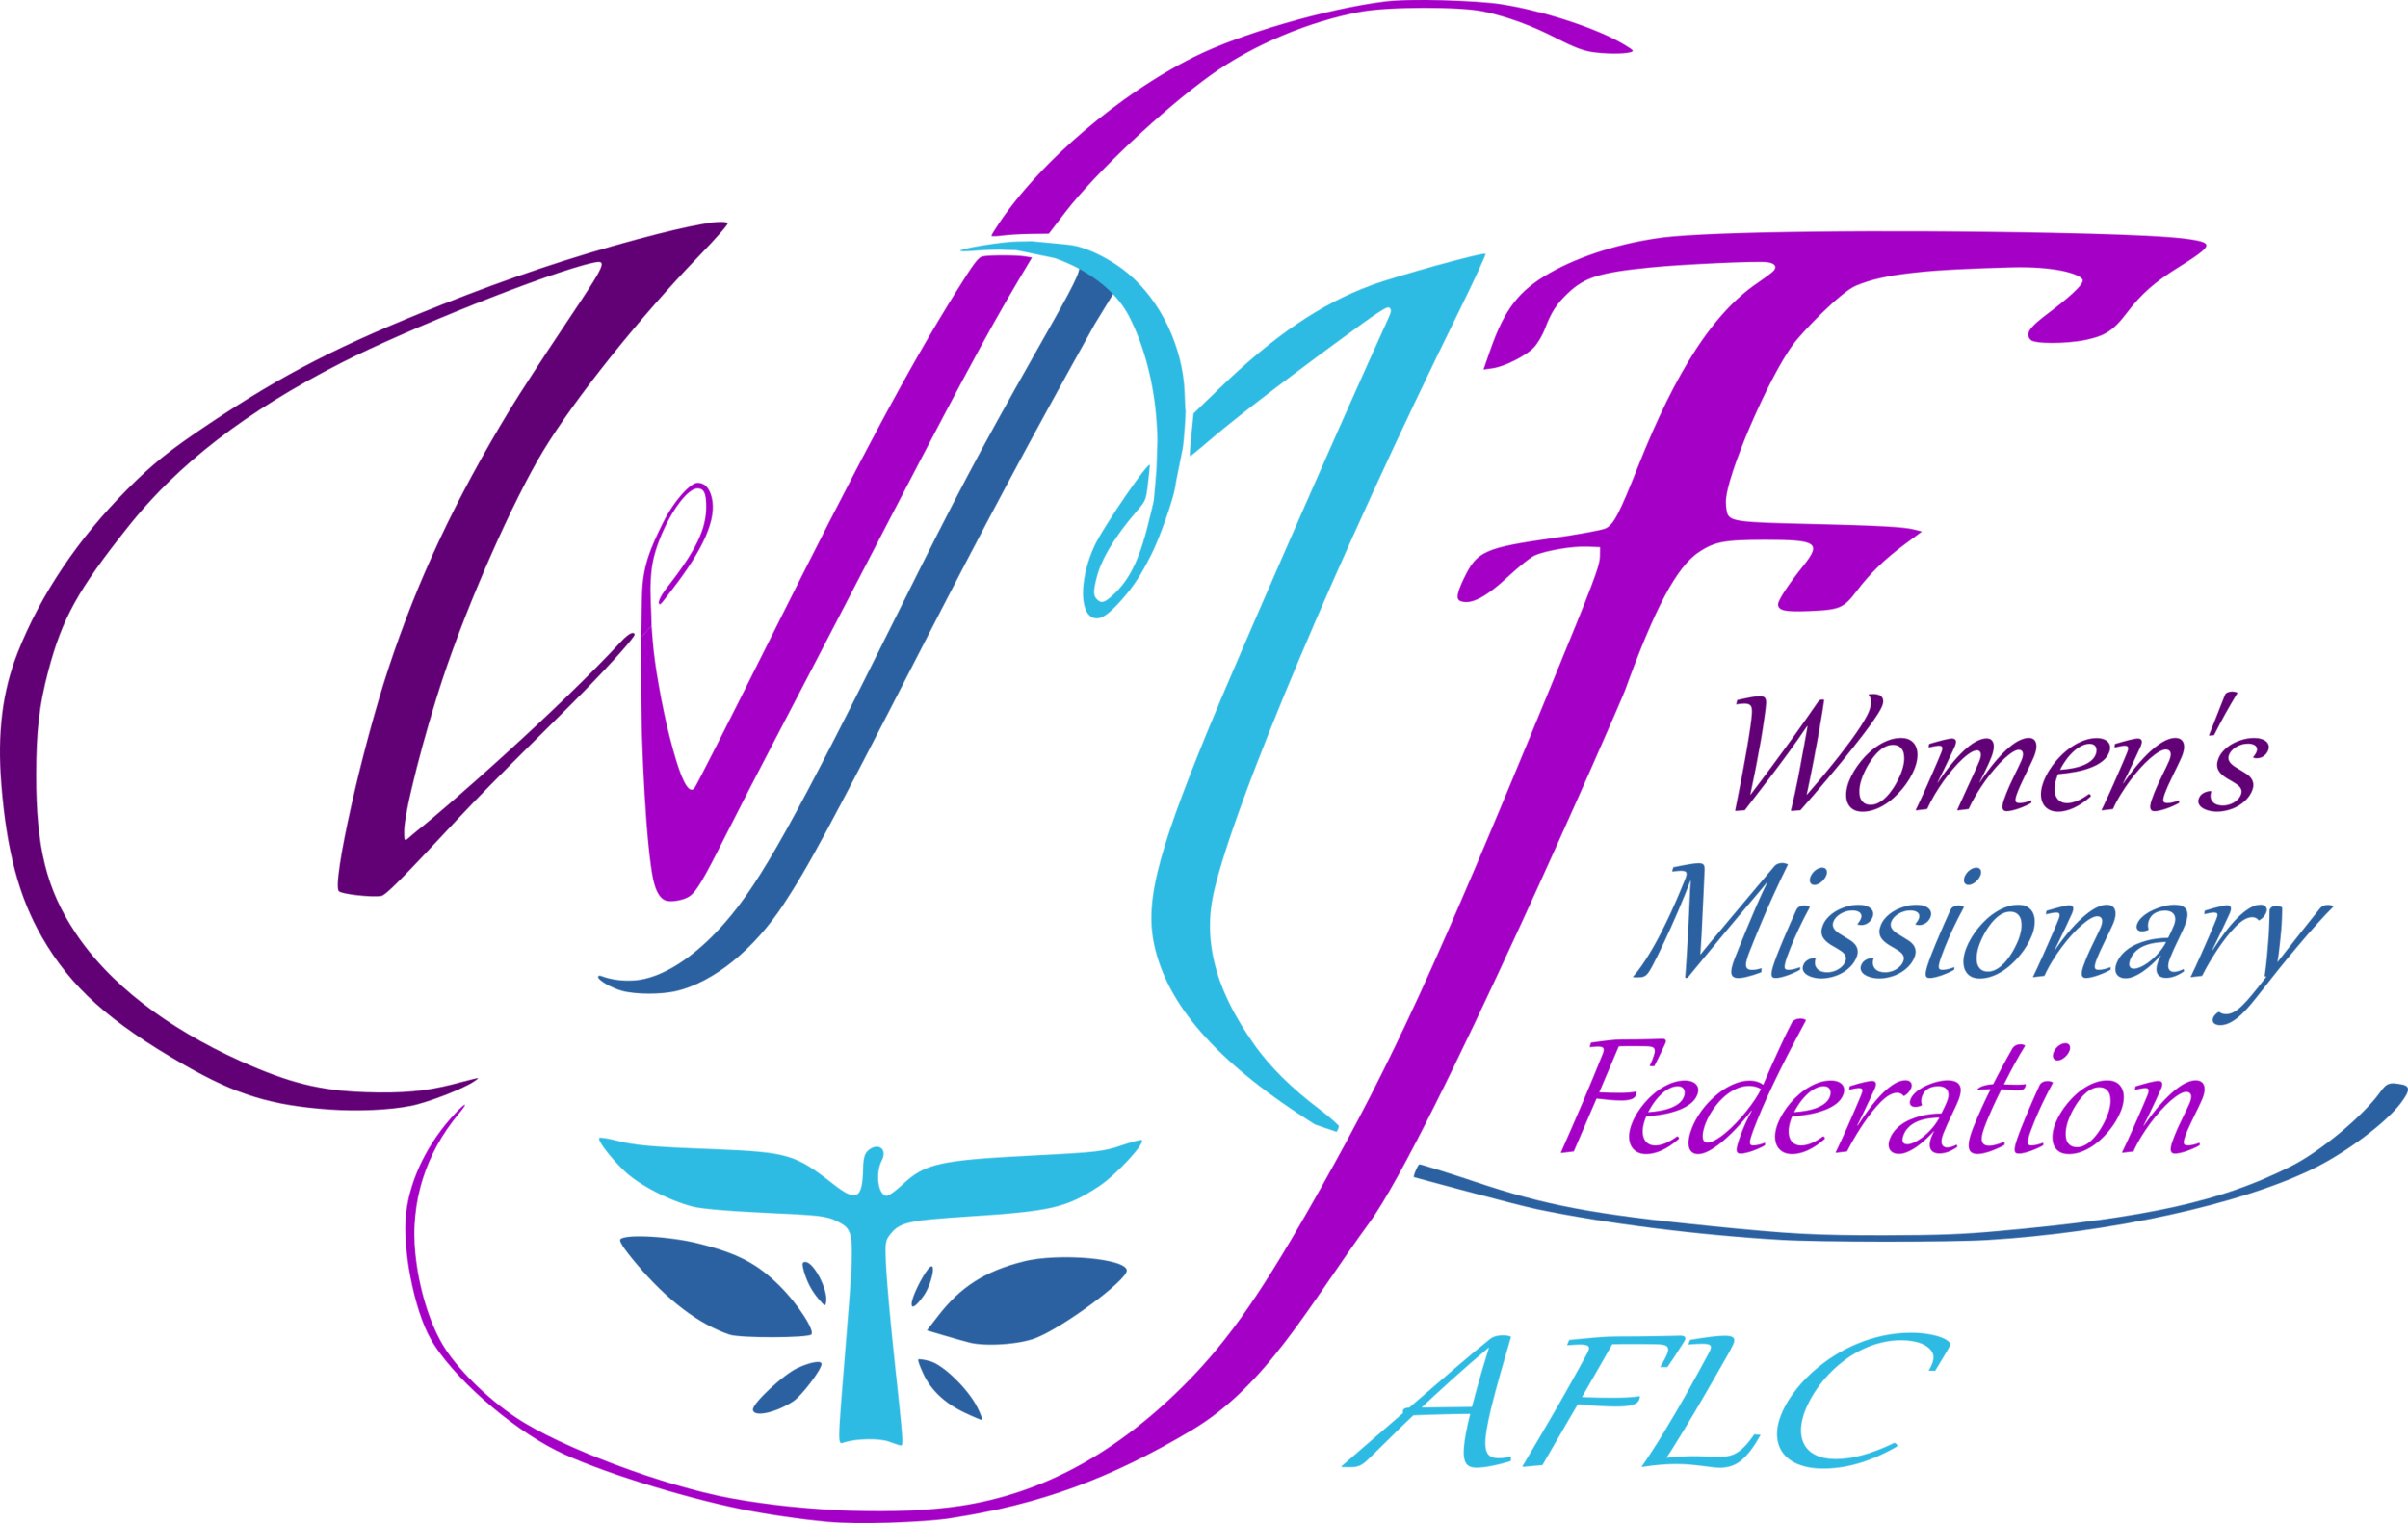 Women's Missionary Federation